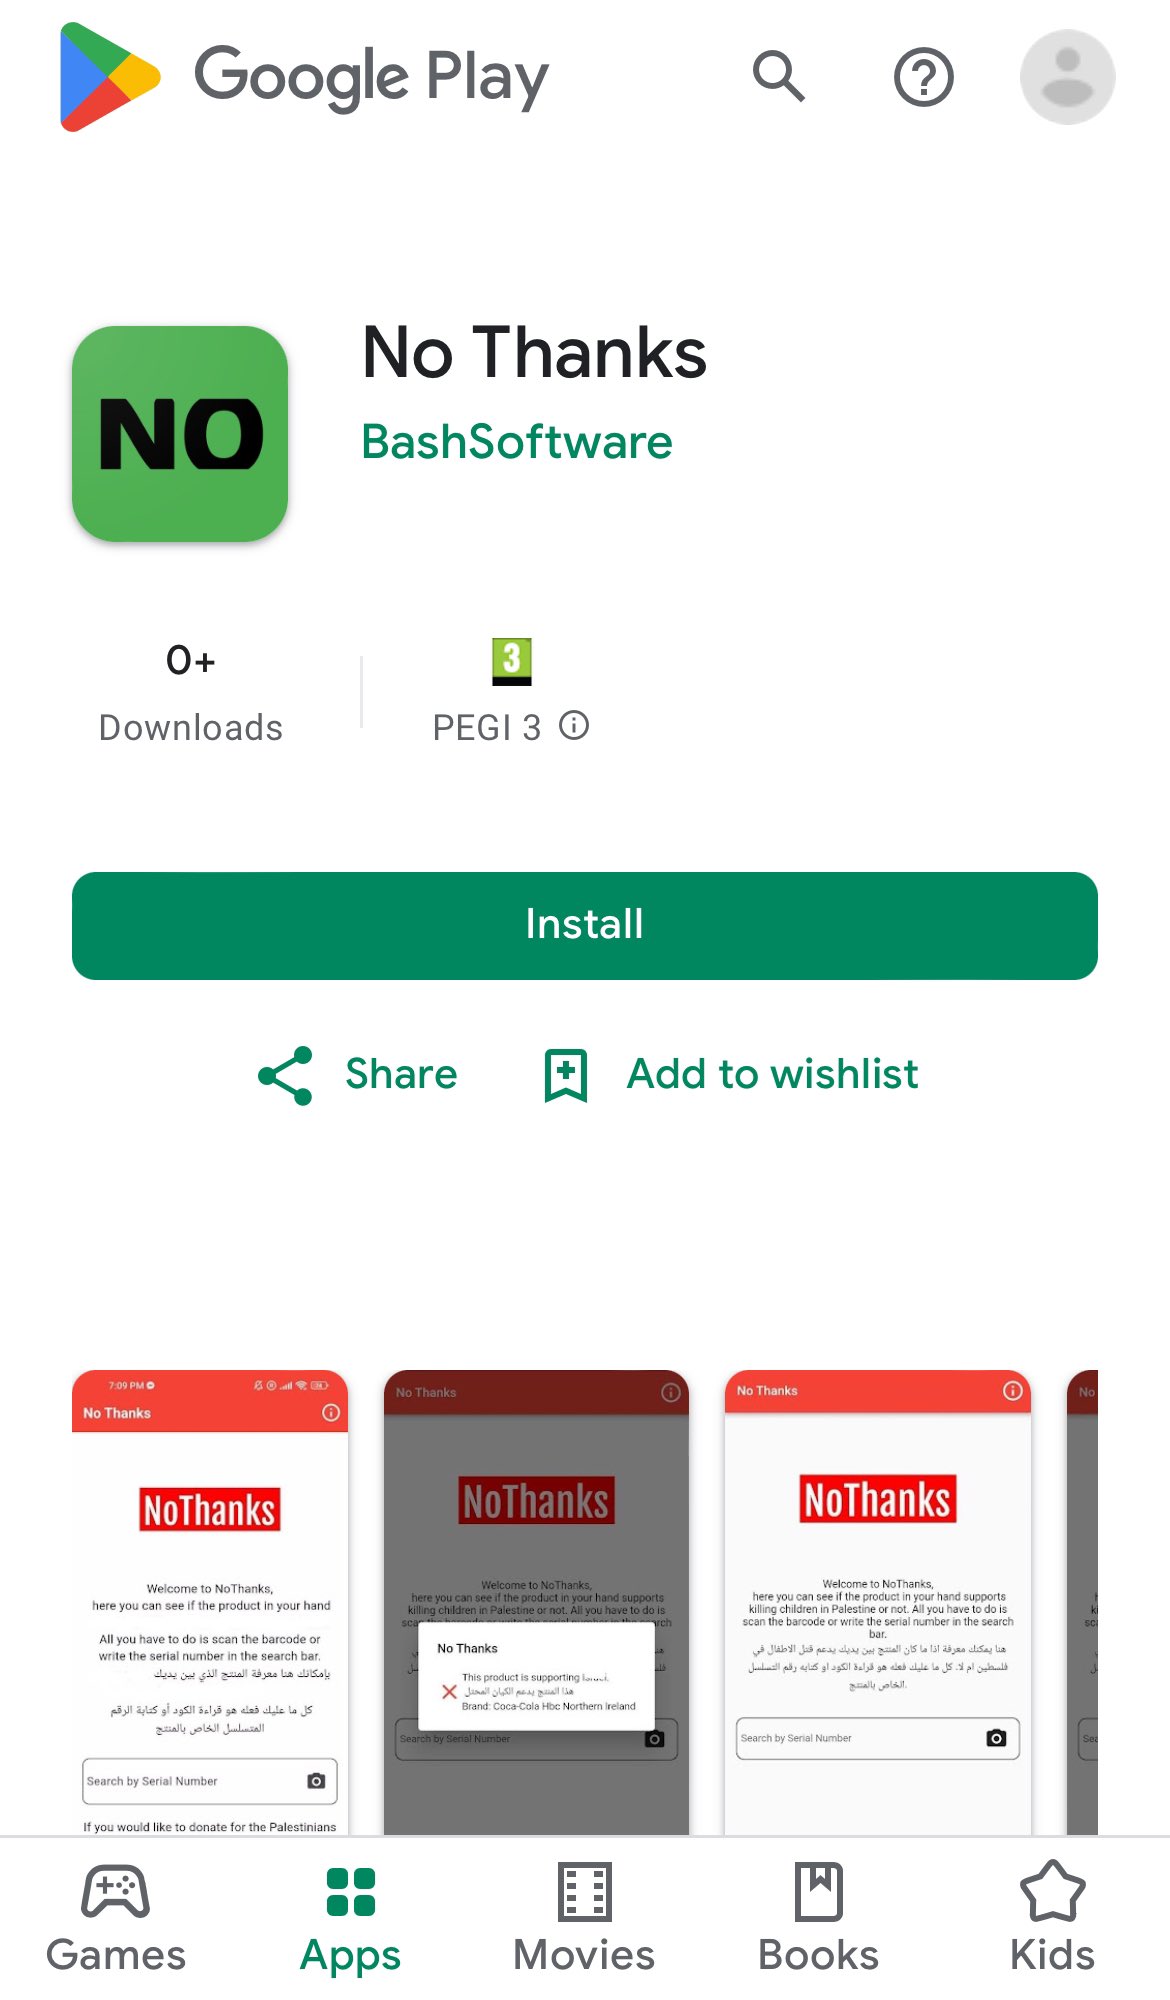 NoThanks on X: The app has been suspended from play store for